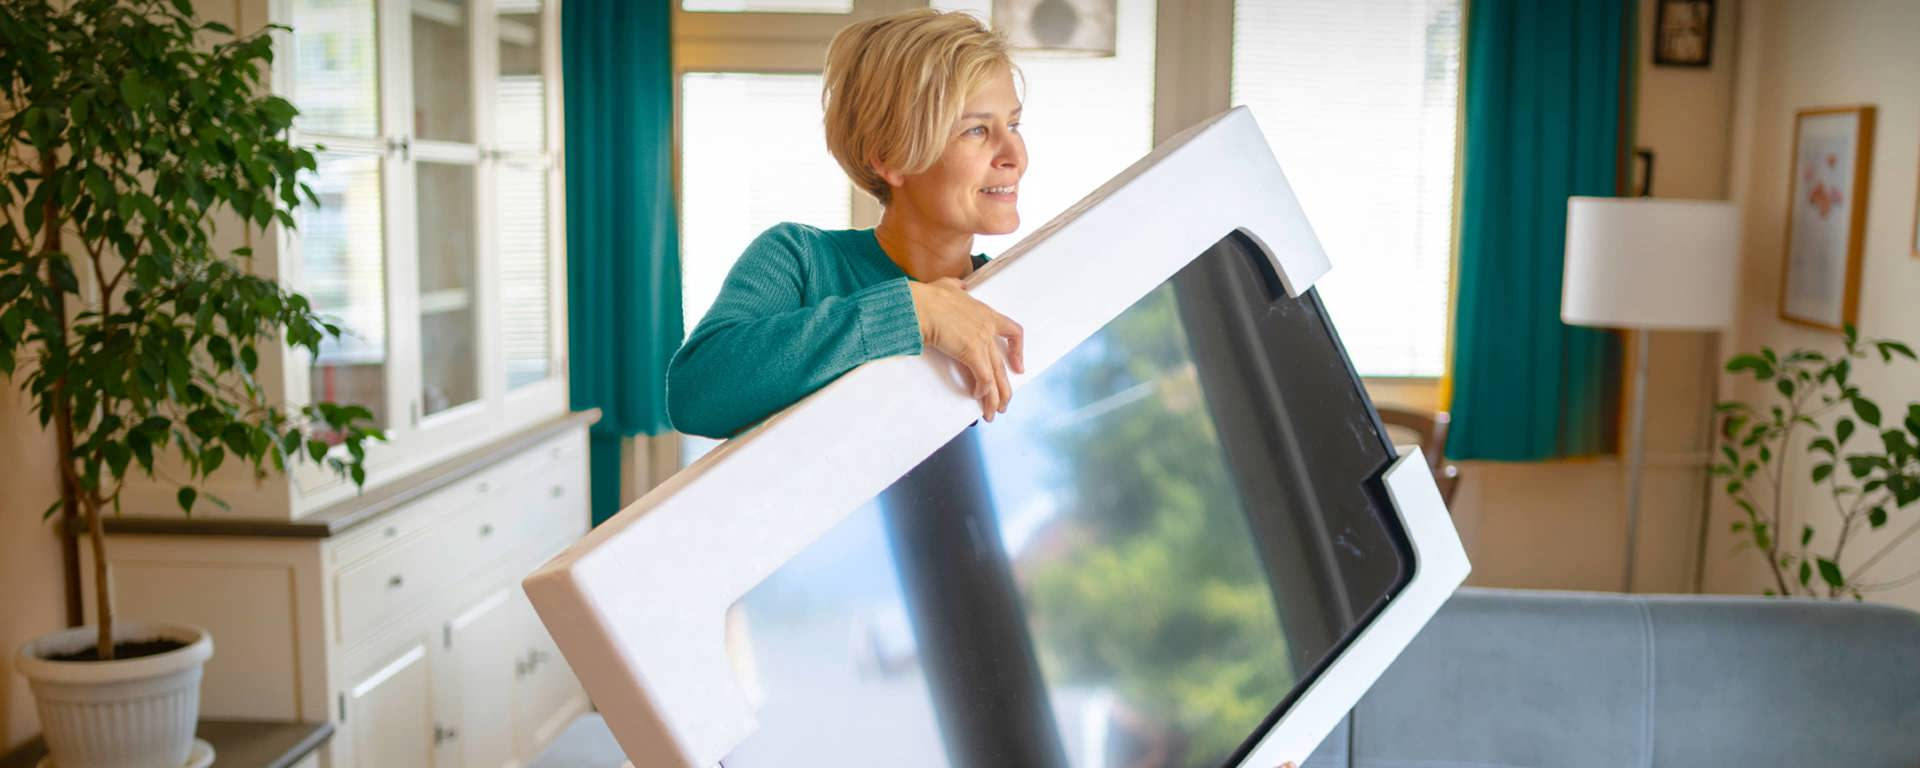 Woman in teal coloured top holding a new TV thanks to Instant Finance cash loans